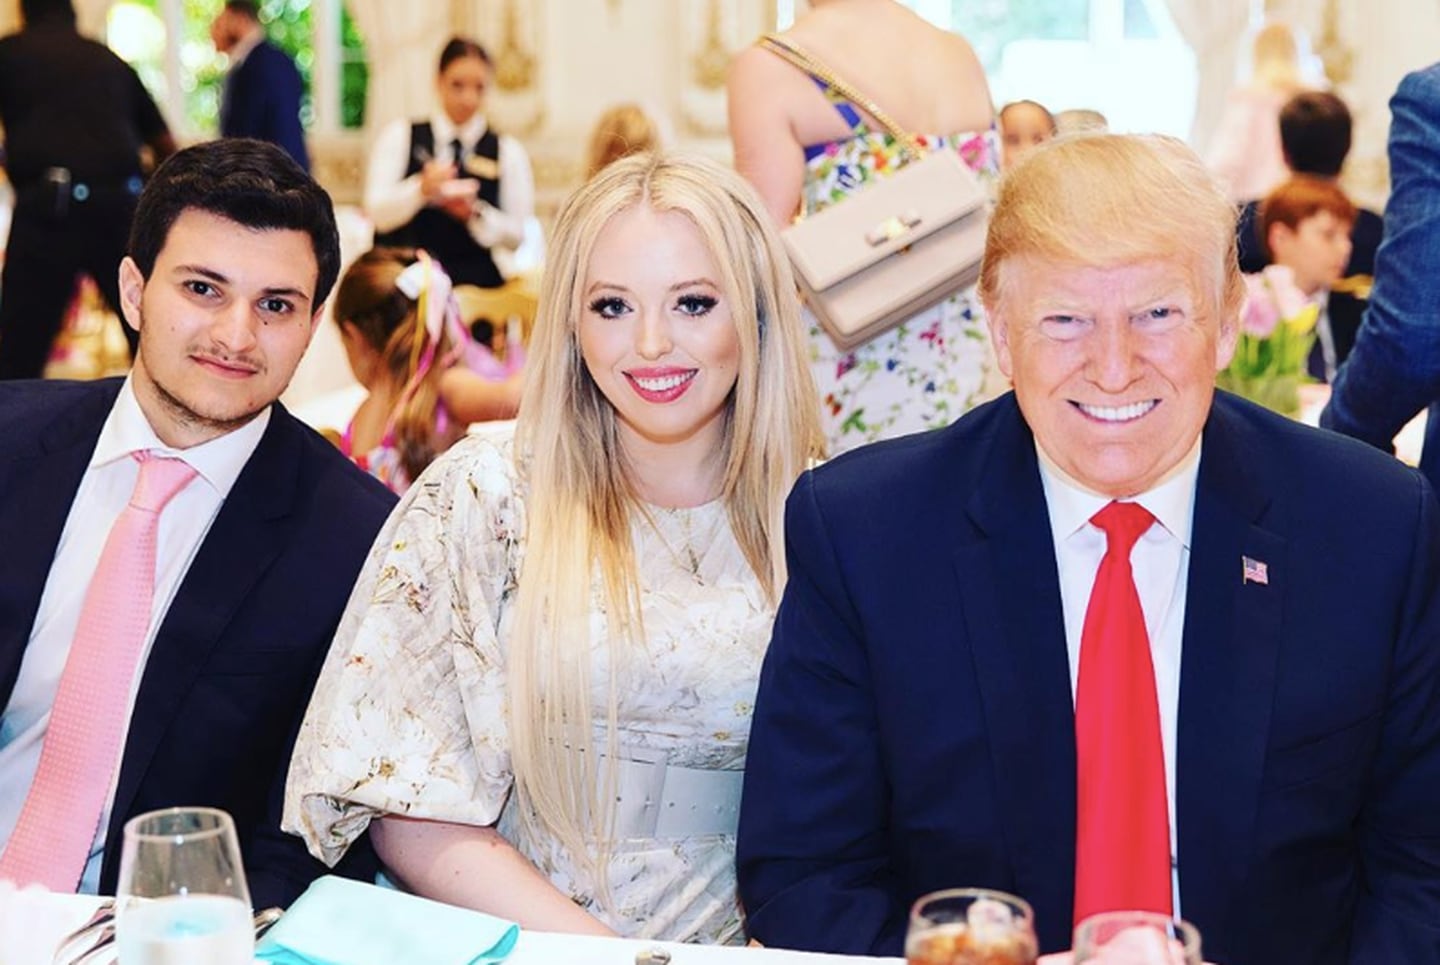 Michael Boulos with Tiffany Trump and her father, former US President Donald Trump. Photo: Michael Boulos / Instagram